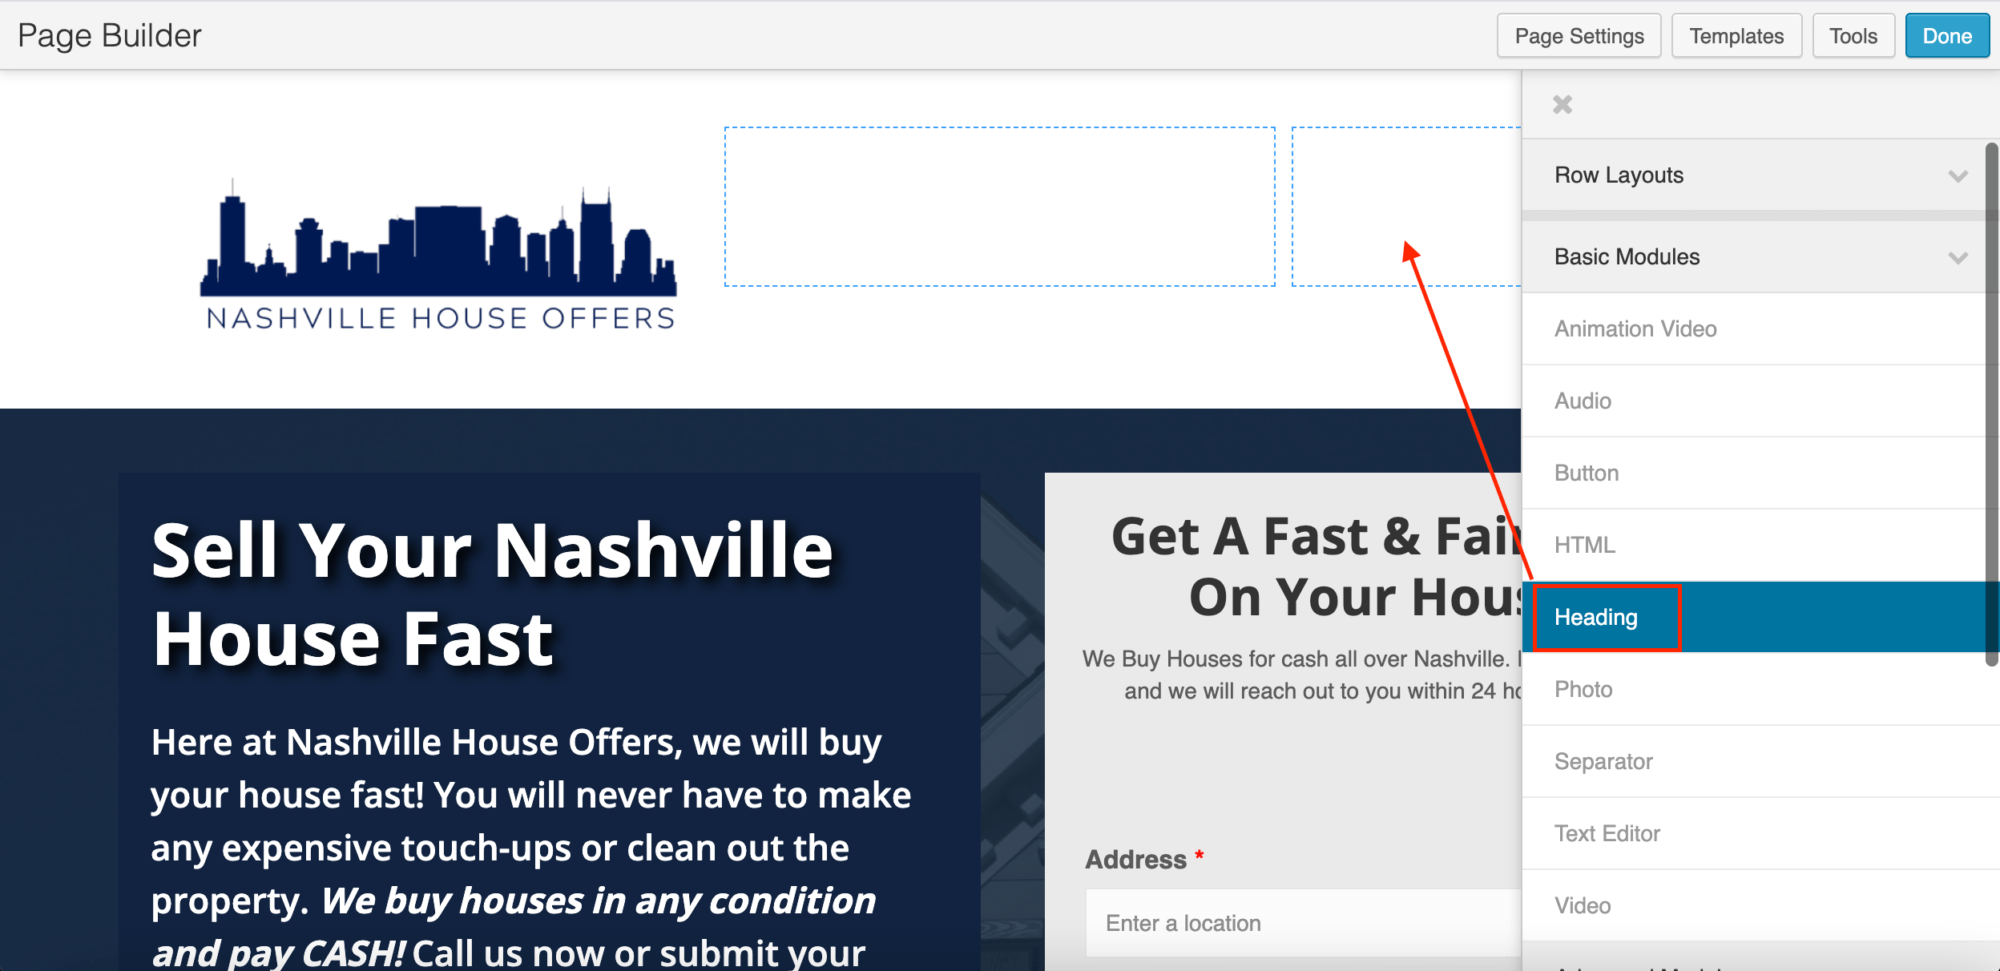 Drag a "Heading" block out to add a CTA to your landing page.